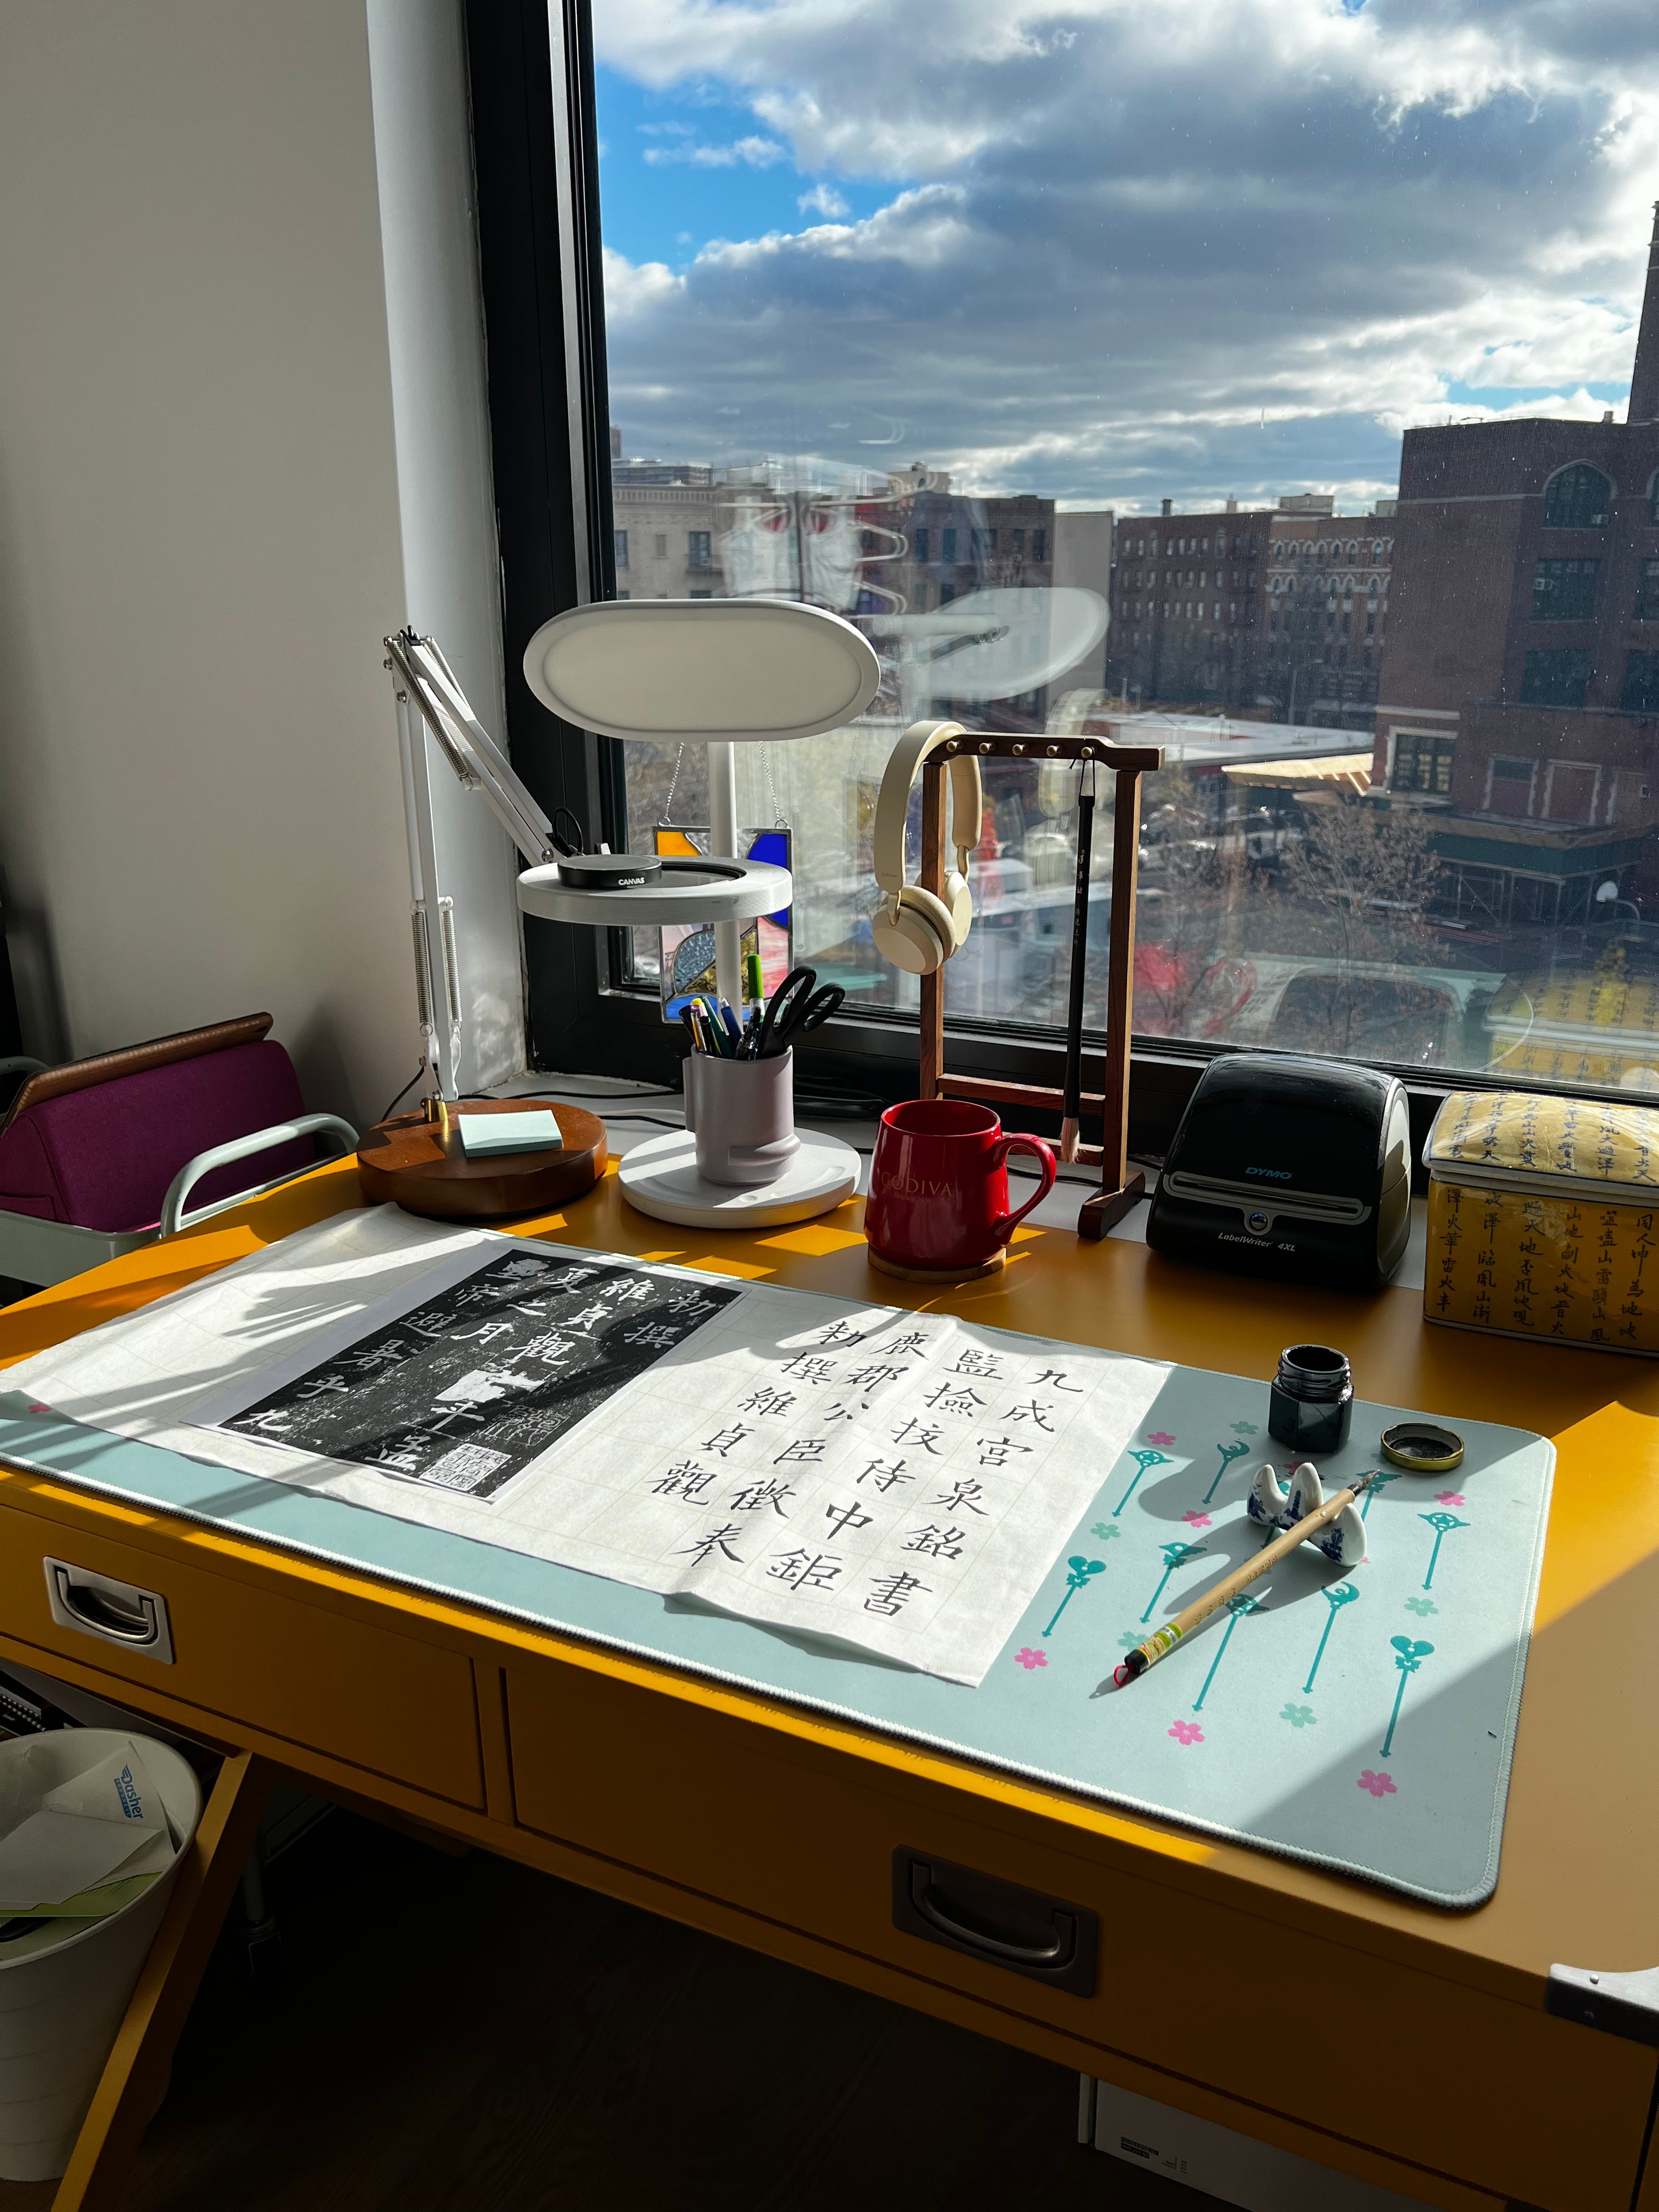 Bonnie's calligraphy table overlooking large window with sunlight streaming in